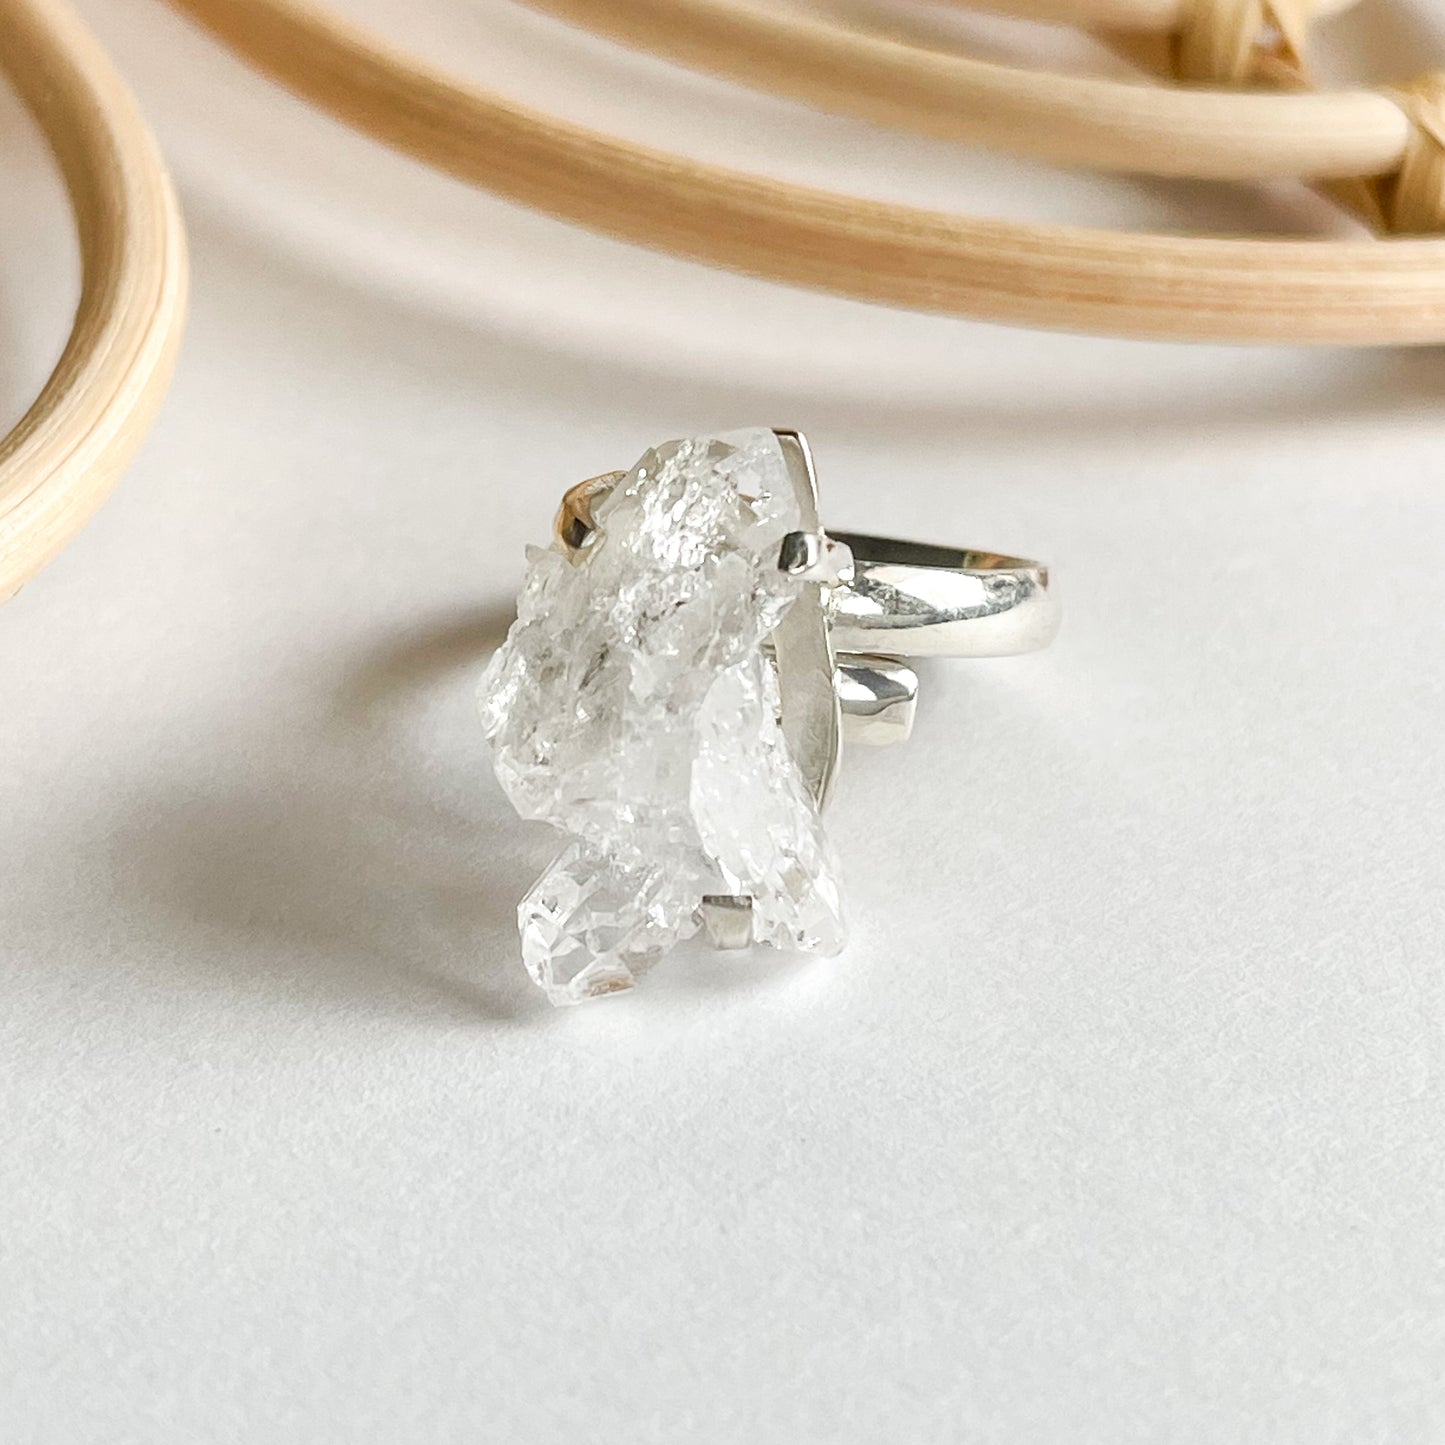 Quartz Crystal Cluster Prong Ring - Solid Sterling Silver